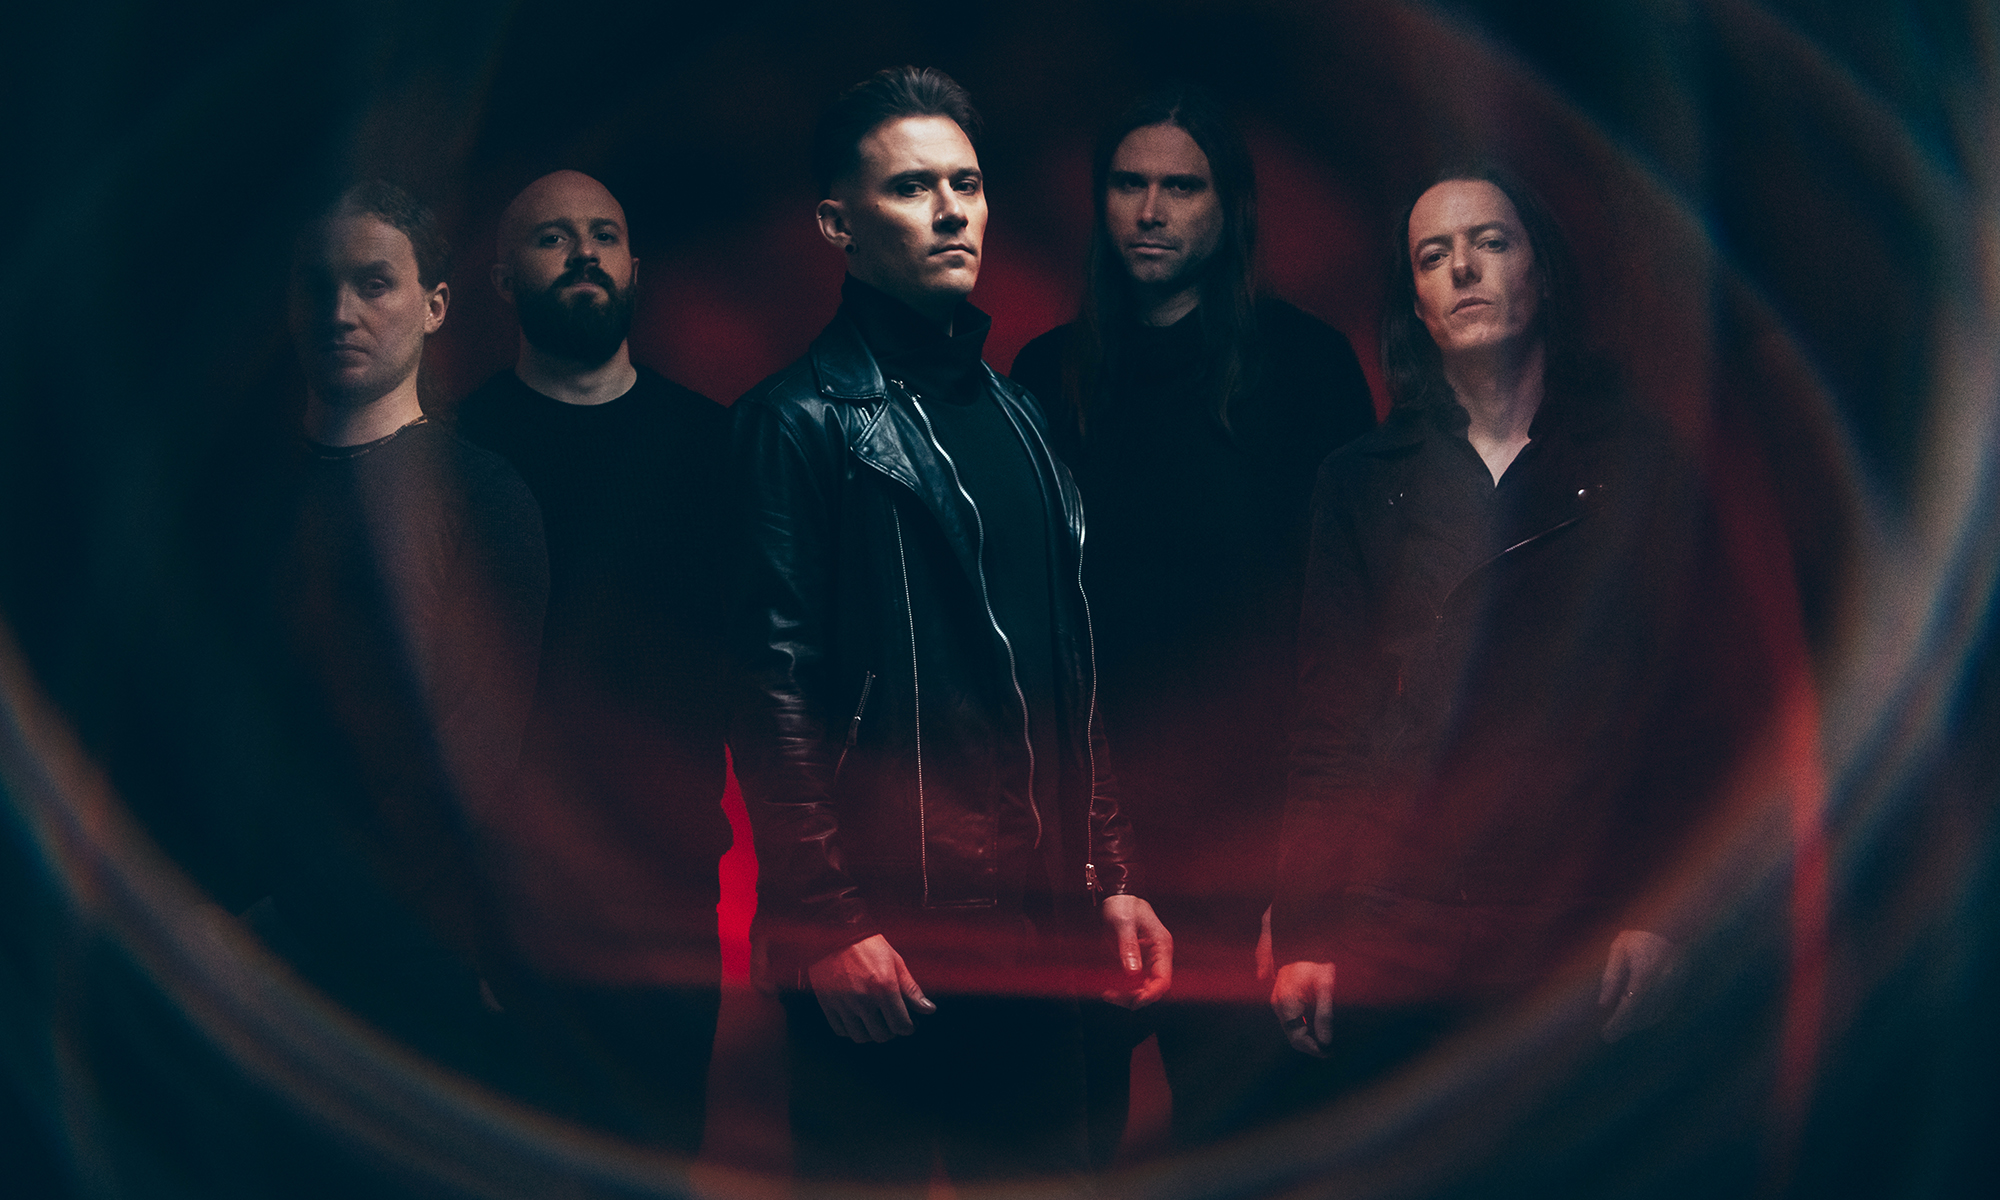 Tesseract standing together